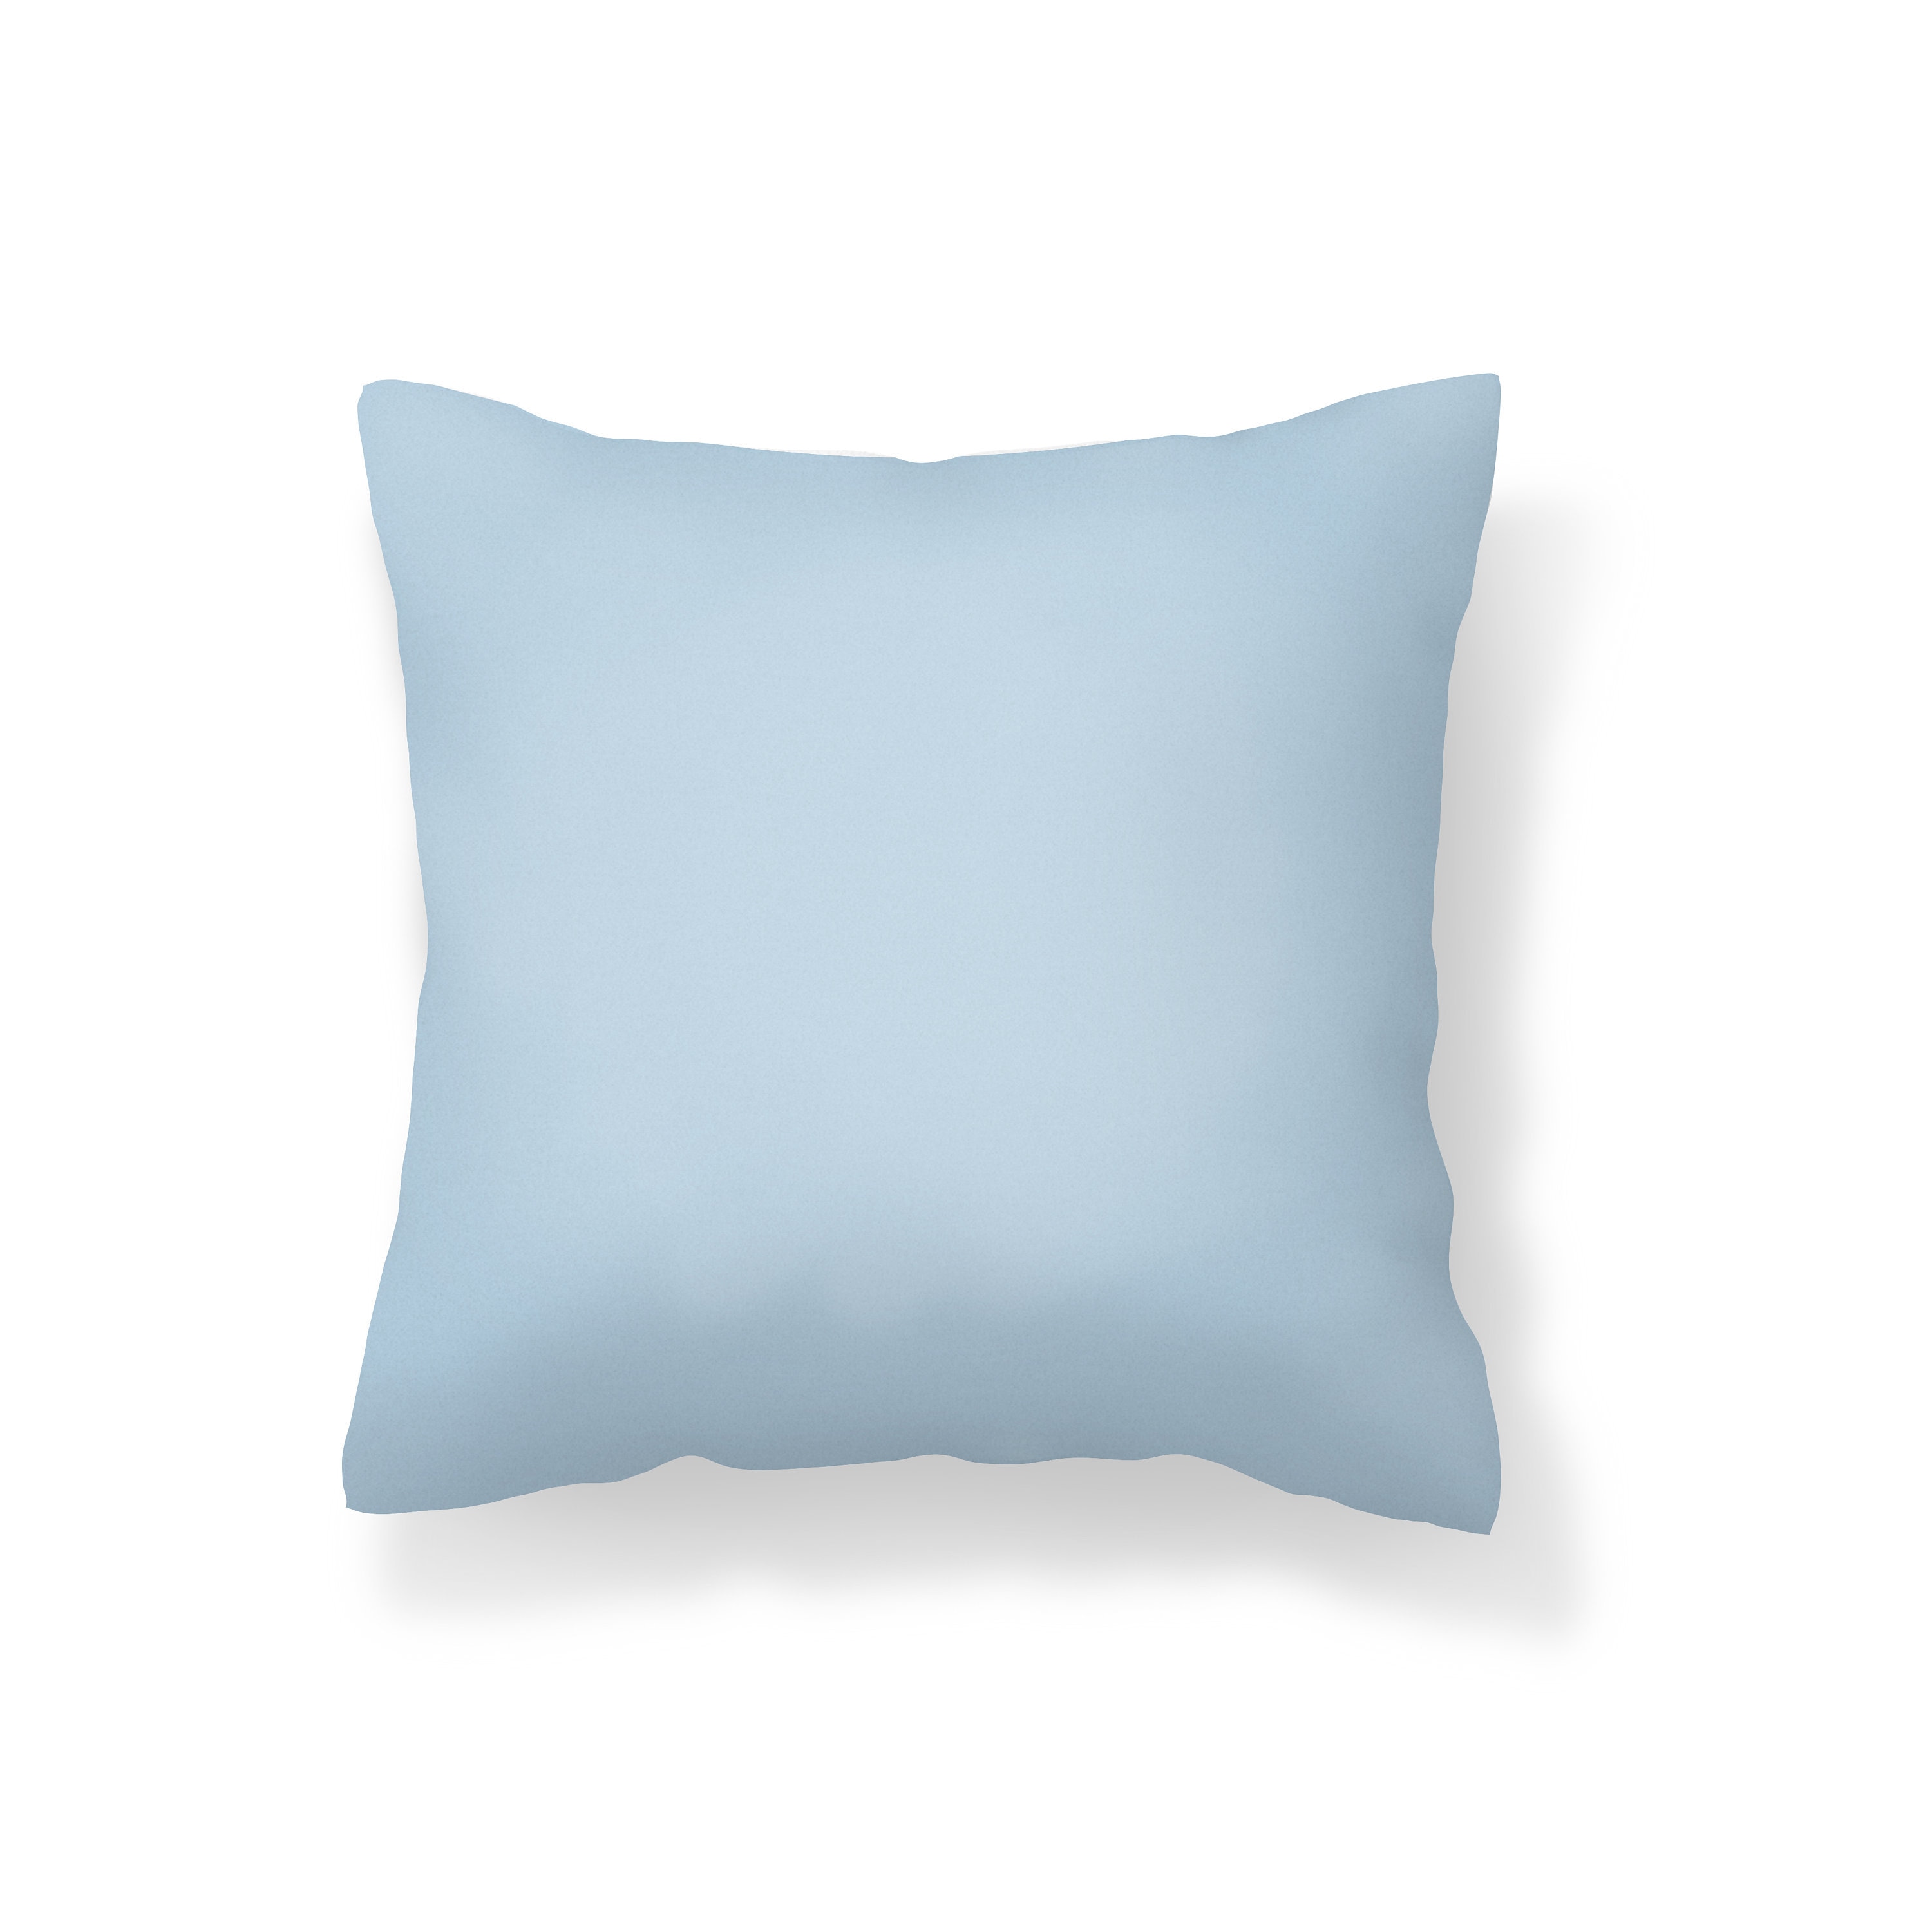 Solid Light Blue Throw Pillow Cover, Light Blue Accent Pillow Cover